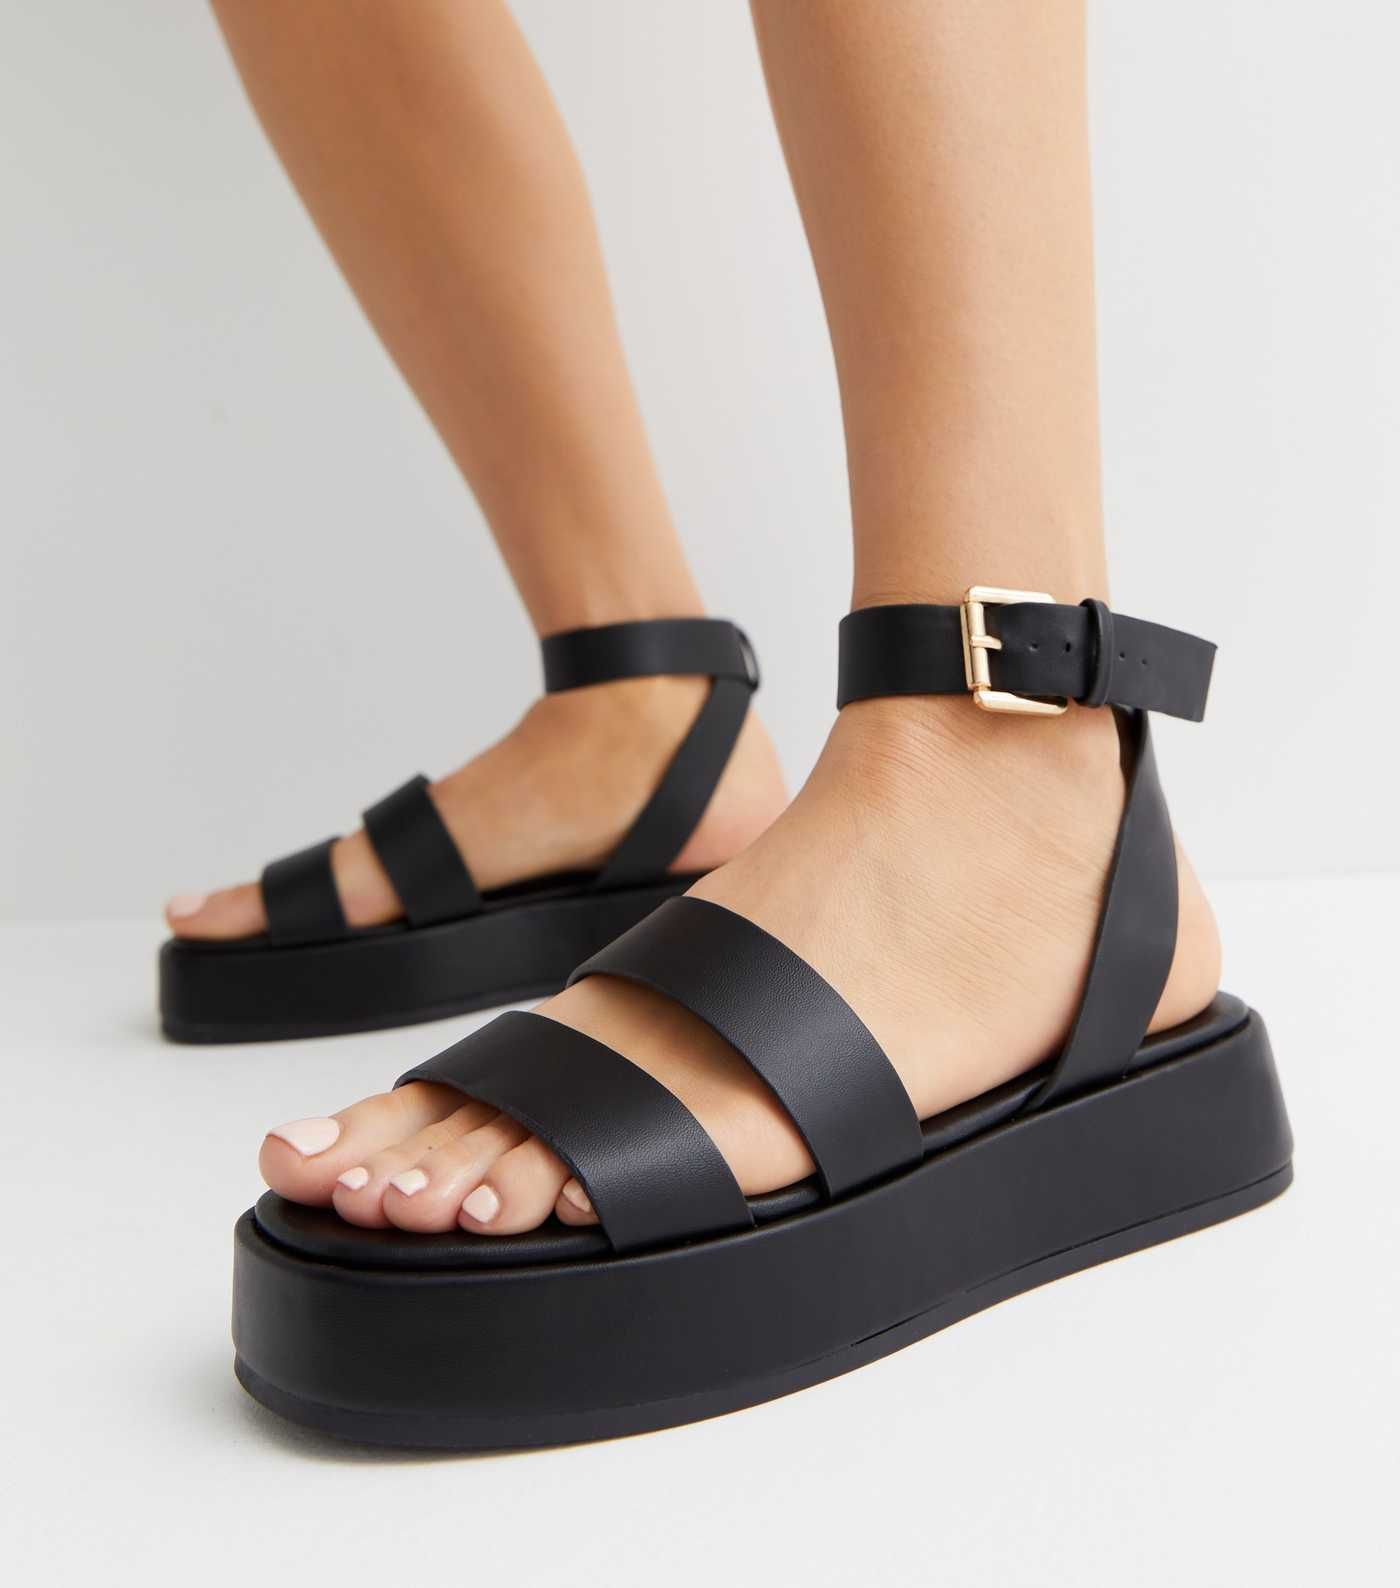 Black Chunky Flatform Sandals
						
						Add to Saved Items
						Remove from Saved Items | New Look (UK)